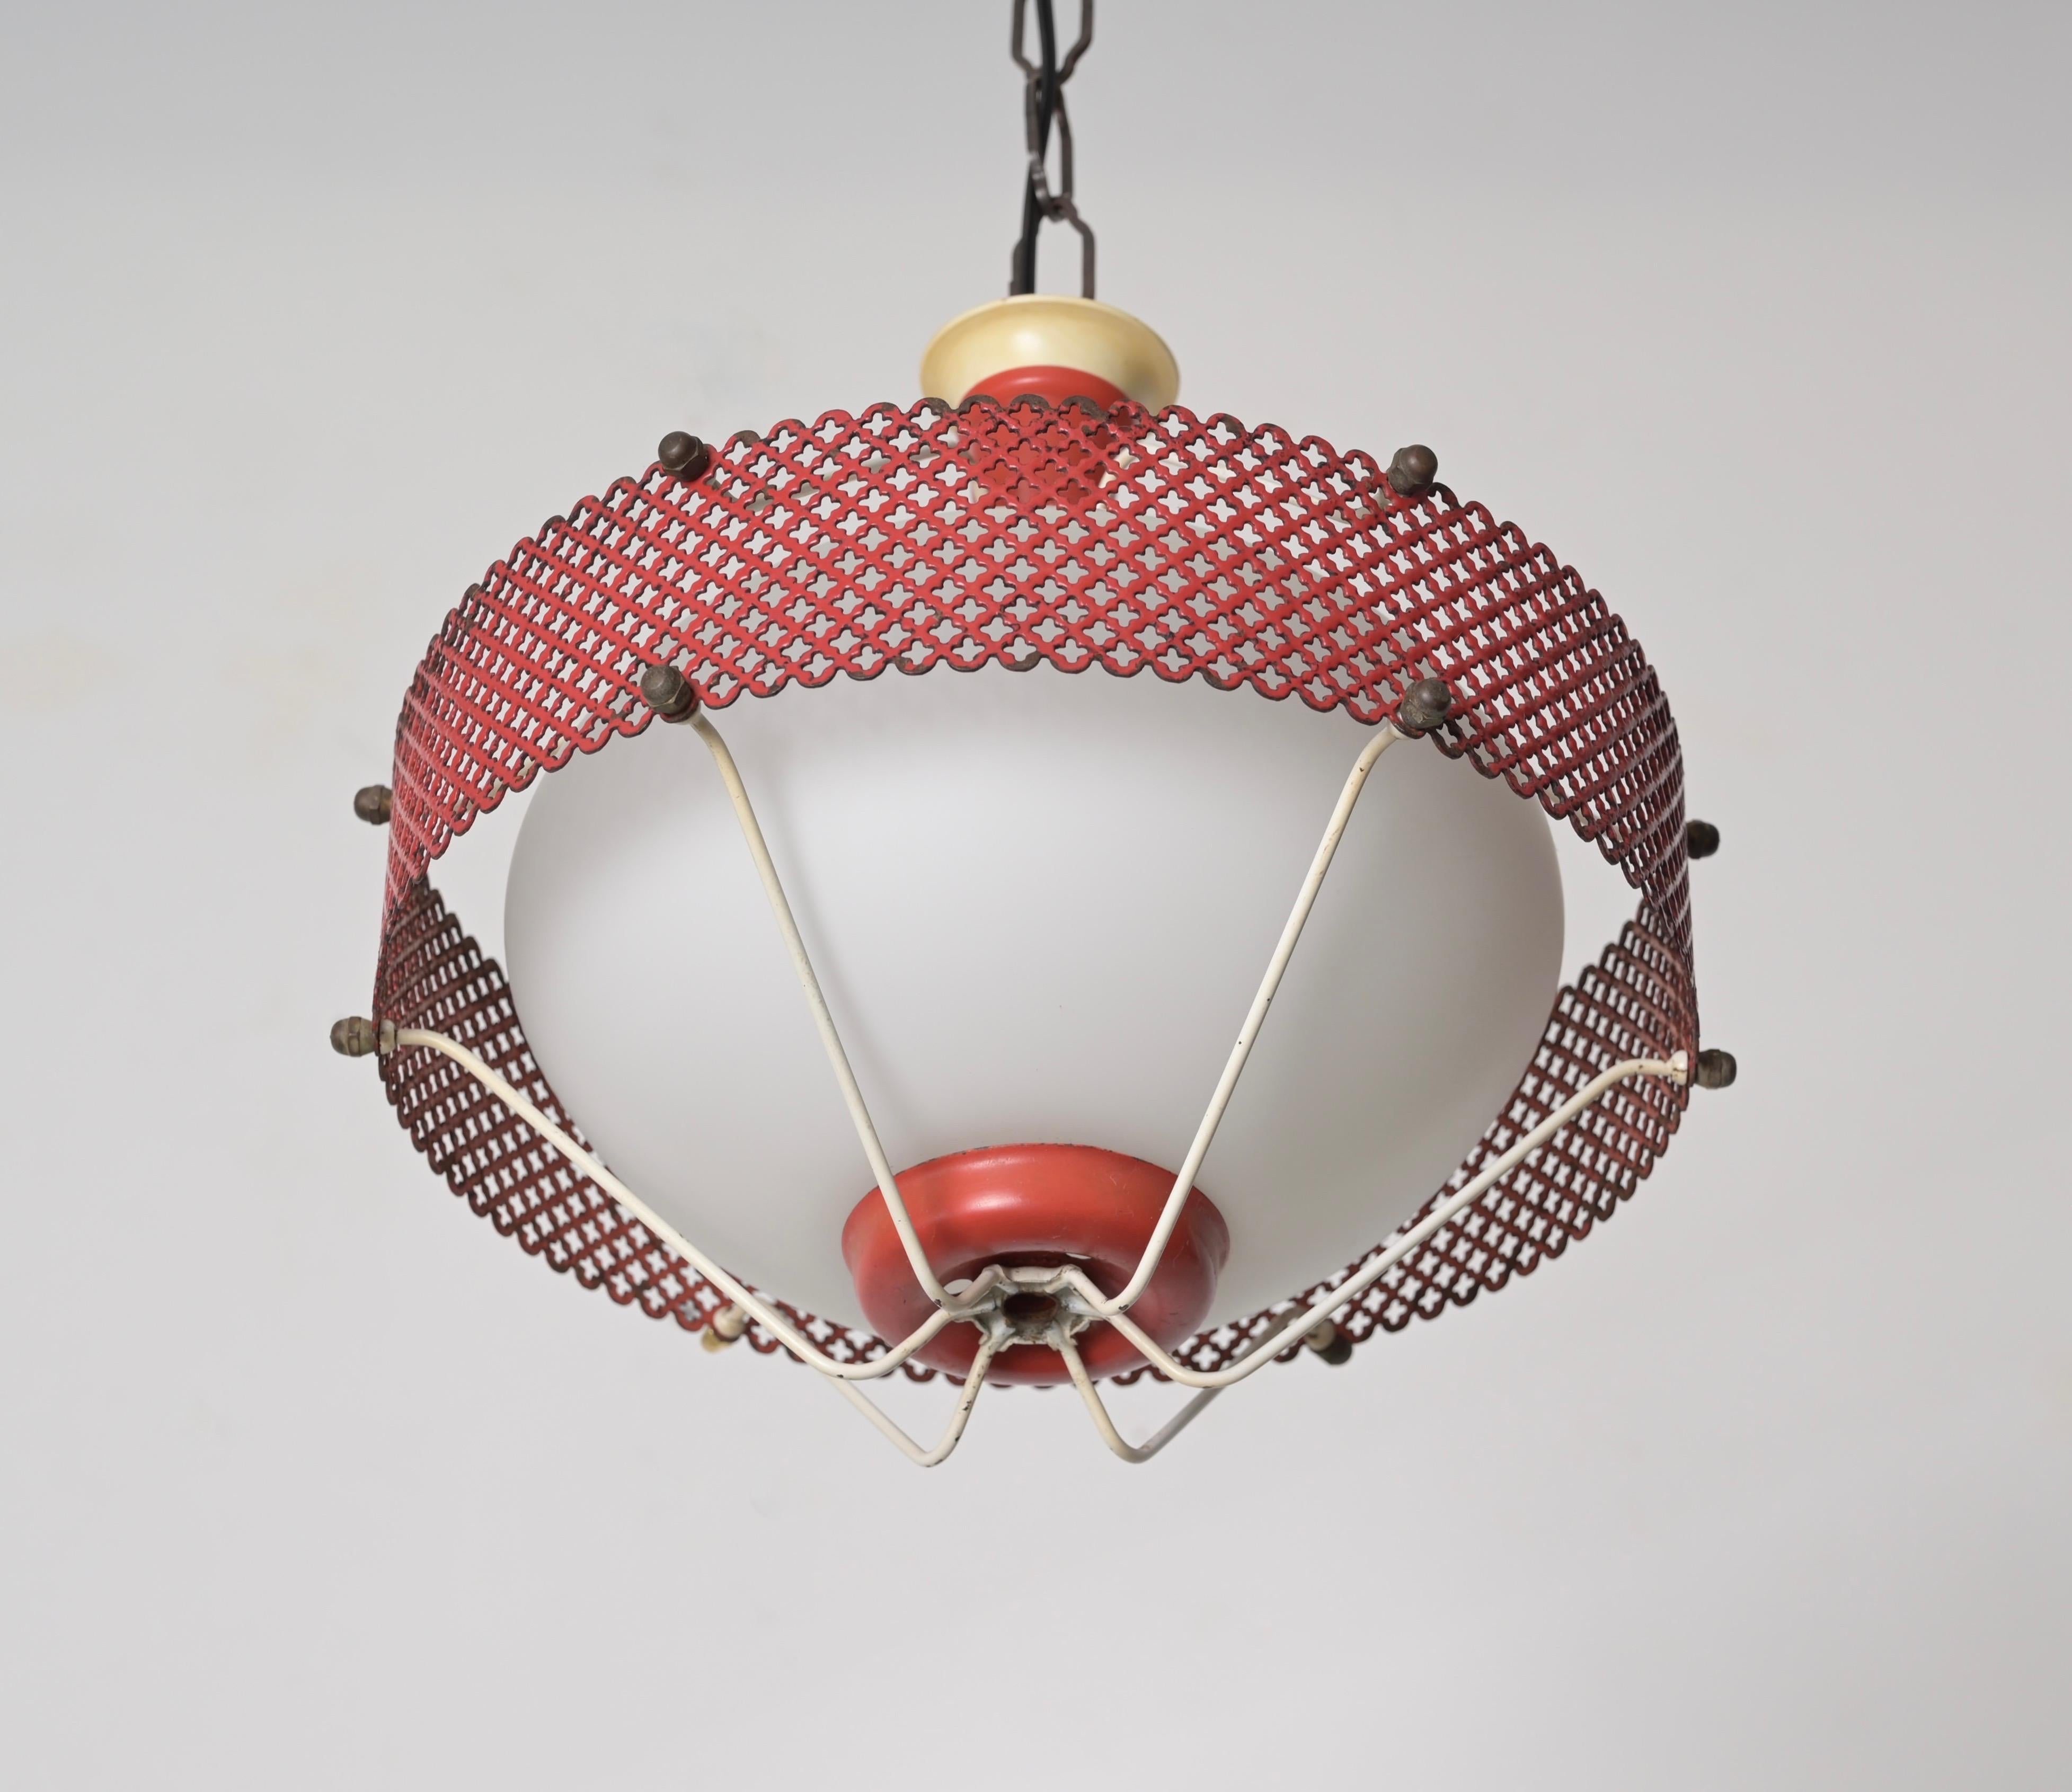 Mathieu Matégot Pendant Lamps in Opal Glass, Red Metal, 1950s French Lighting For Sale 2